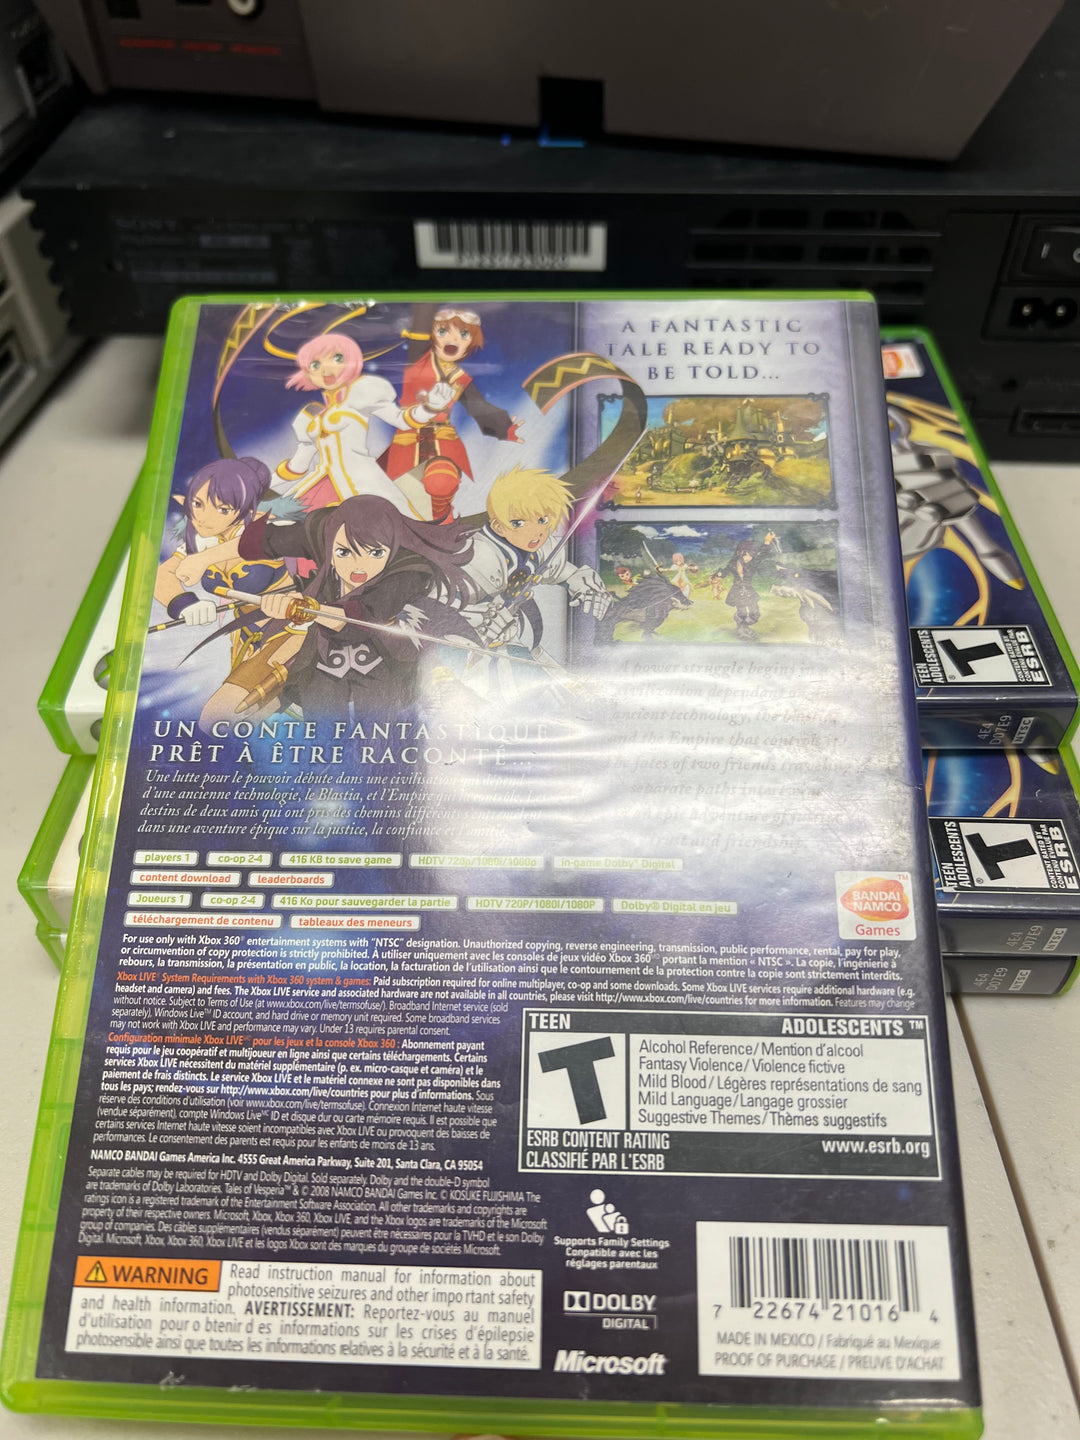 Tales of Vesperia for Microsoft Xbox 360 in case. Tested and working.     DO61024